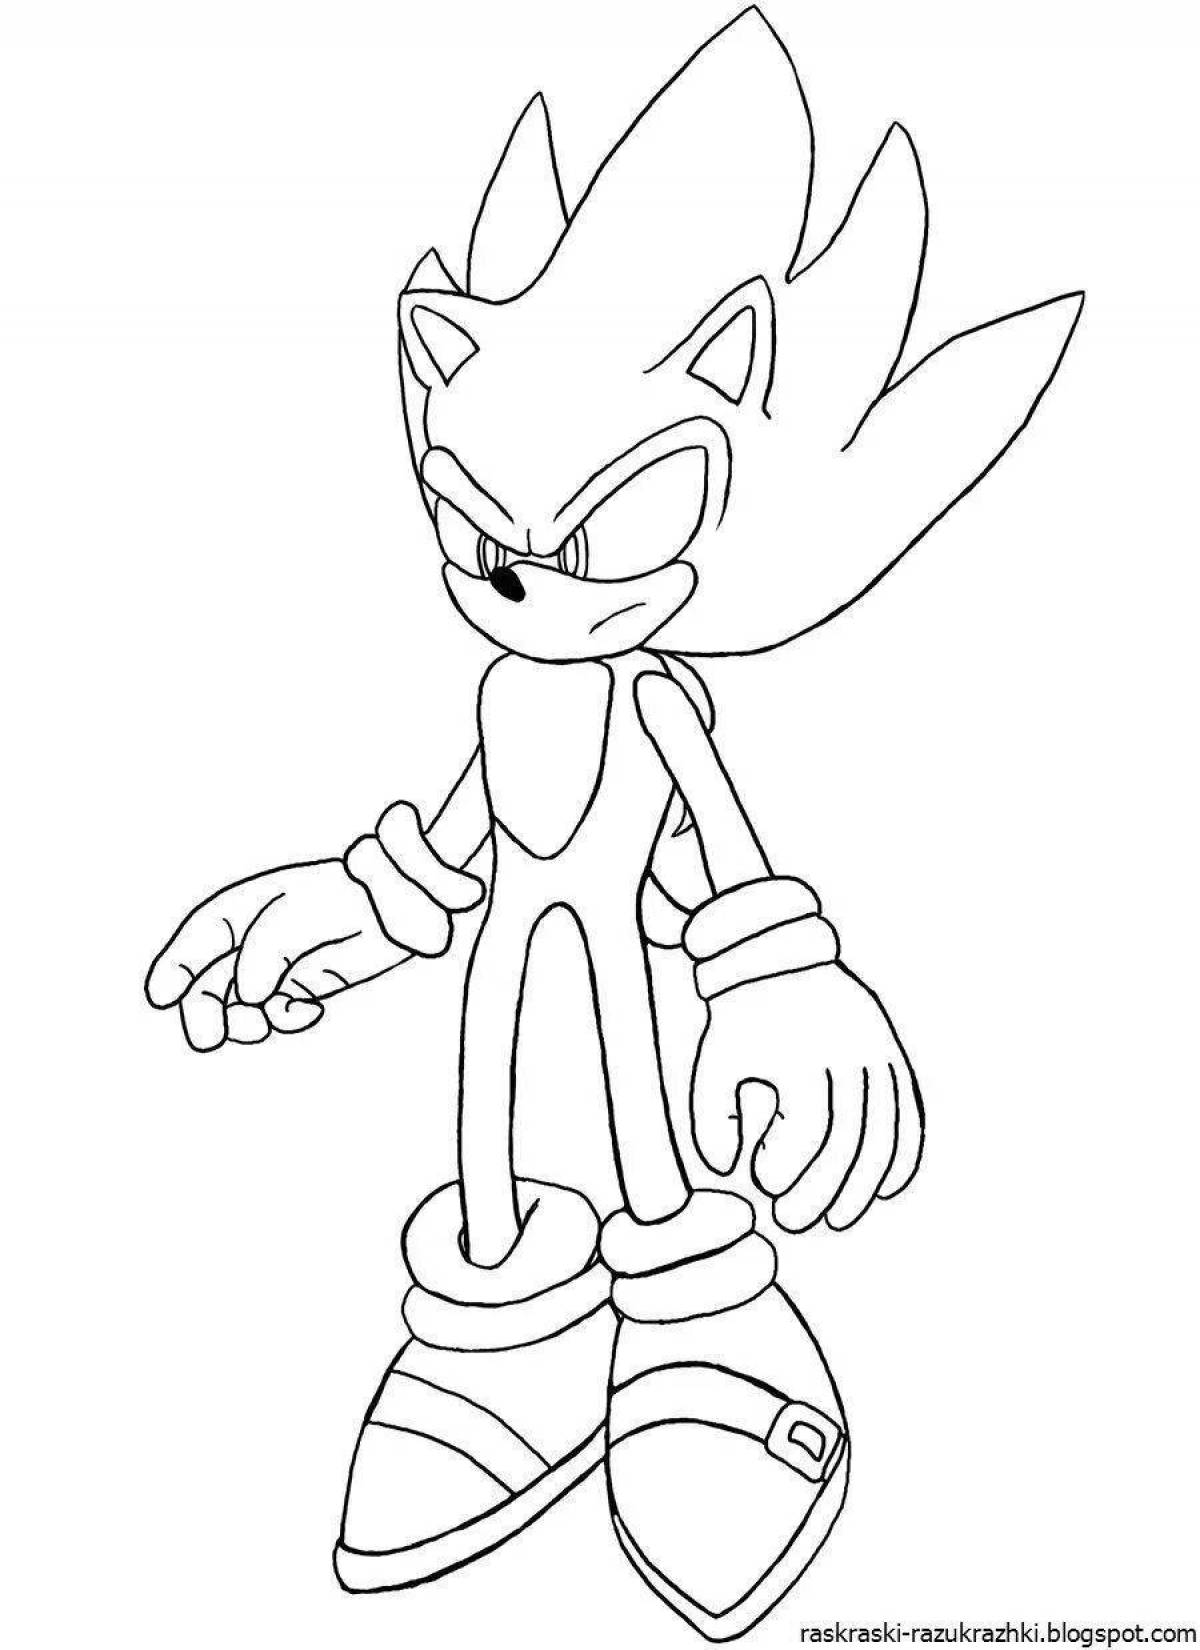 Excellent xs sonic coloring page